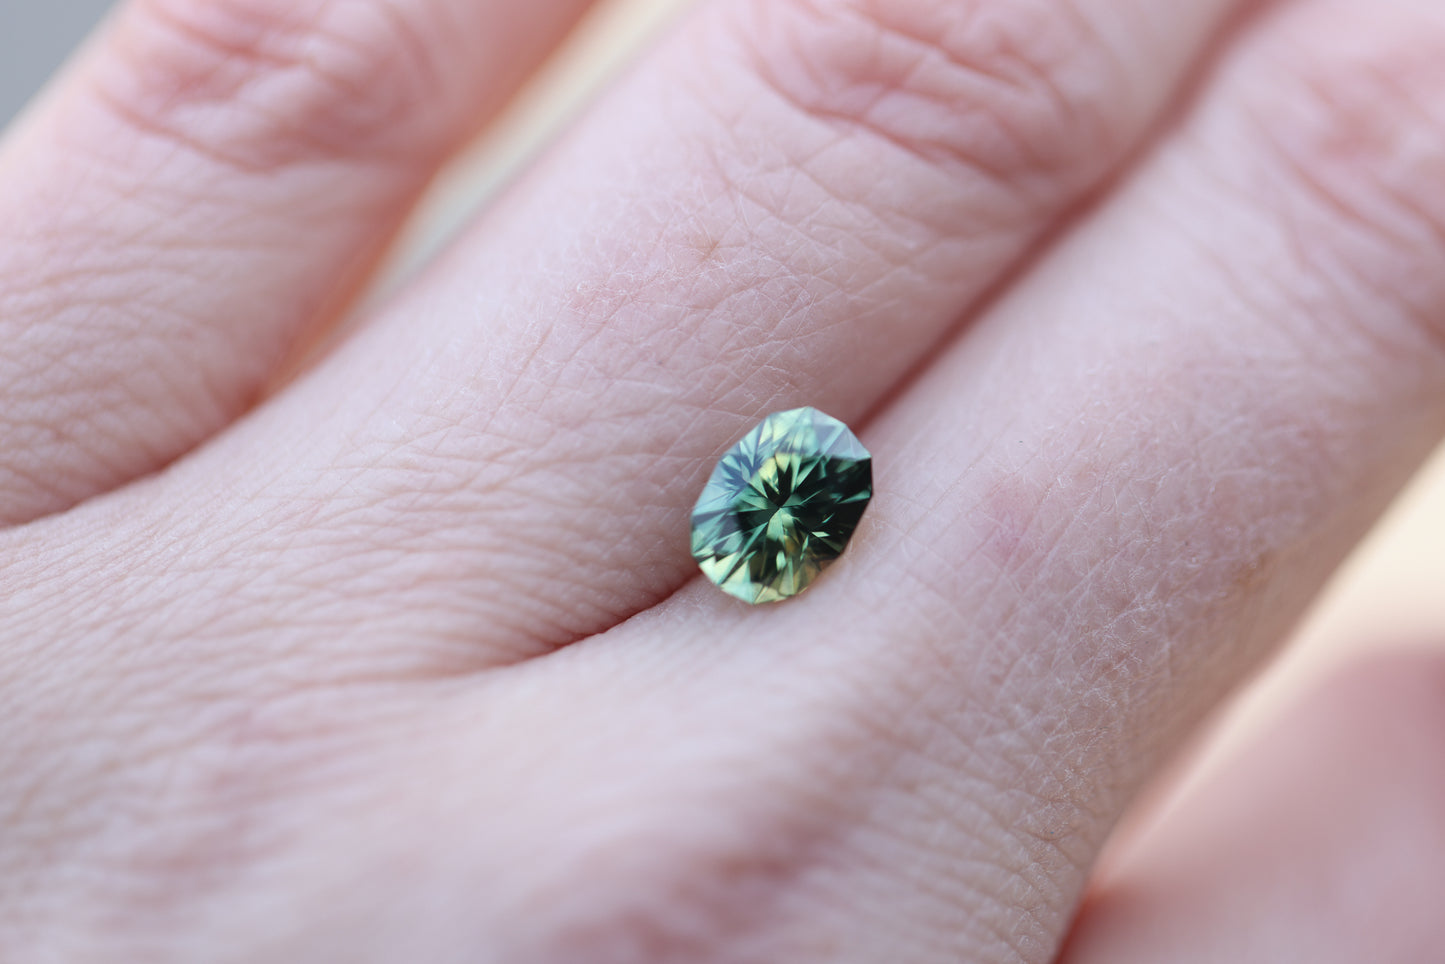 1.82ct oval gren teal yellow sapphire from Earth's Treasury